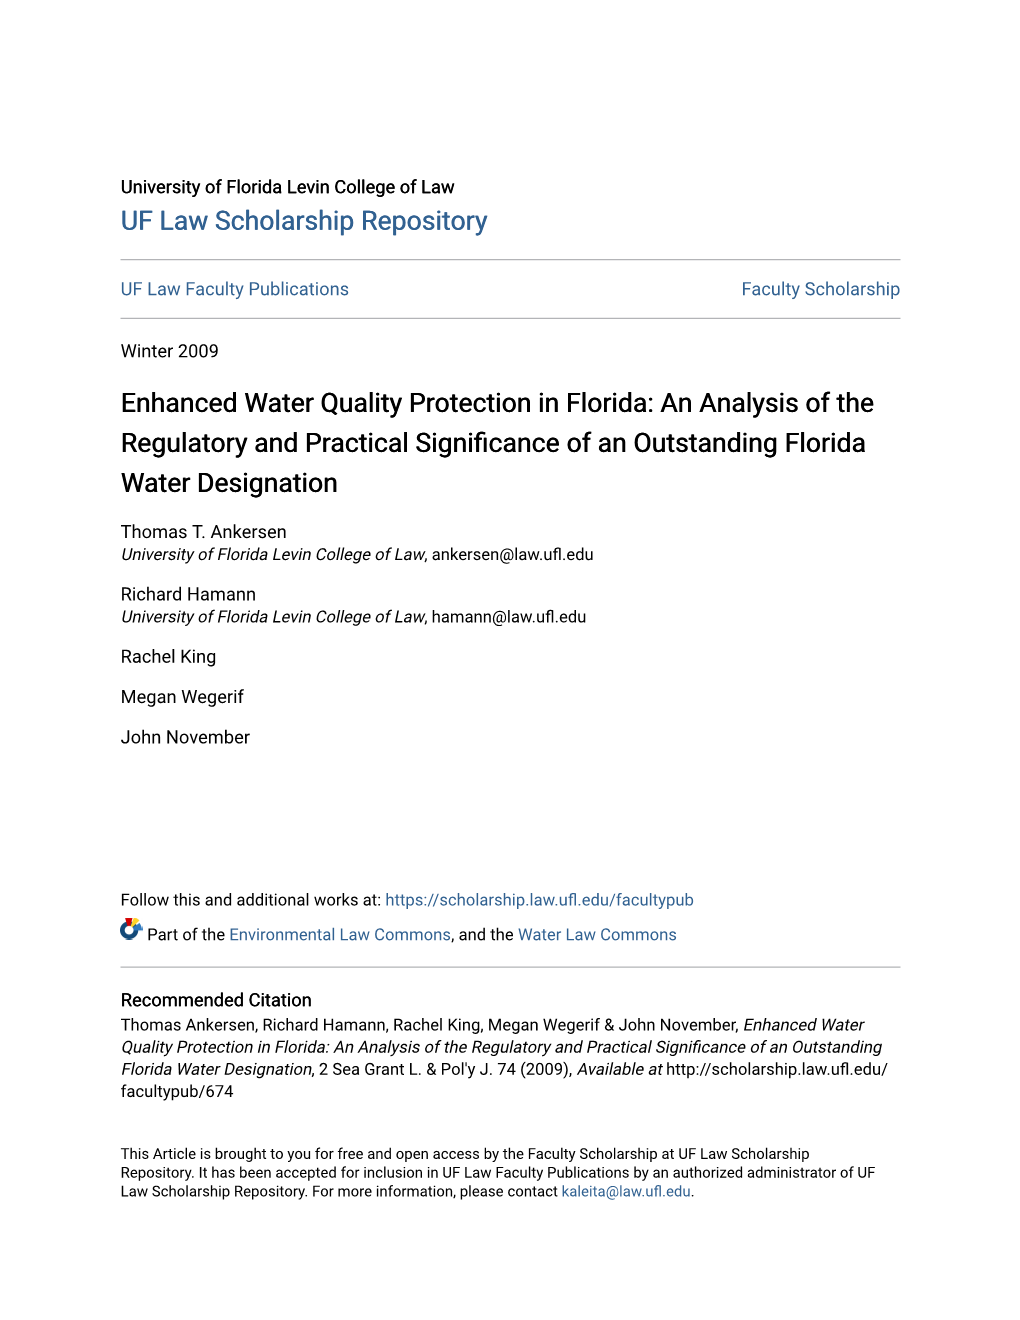 Enhanced Water Quality Protection in Florida: an Analysis of the Regulatory and Practical Significance of an Outstanding Florida Water Designation